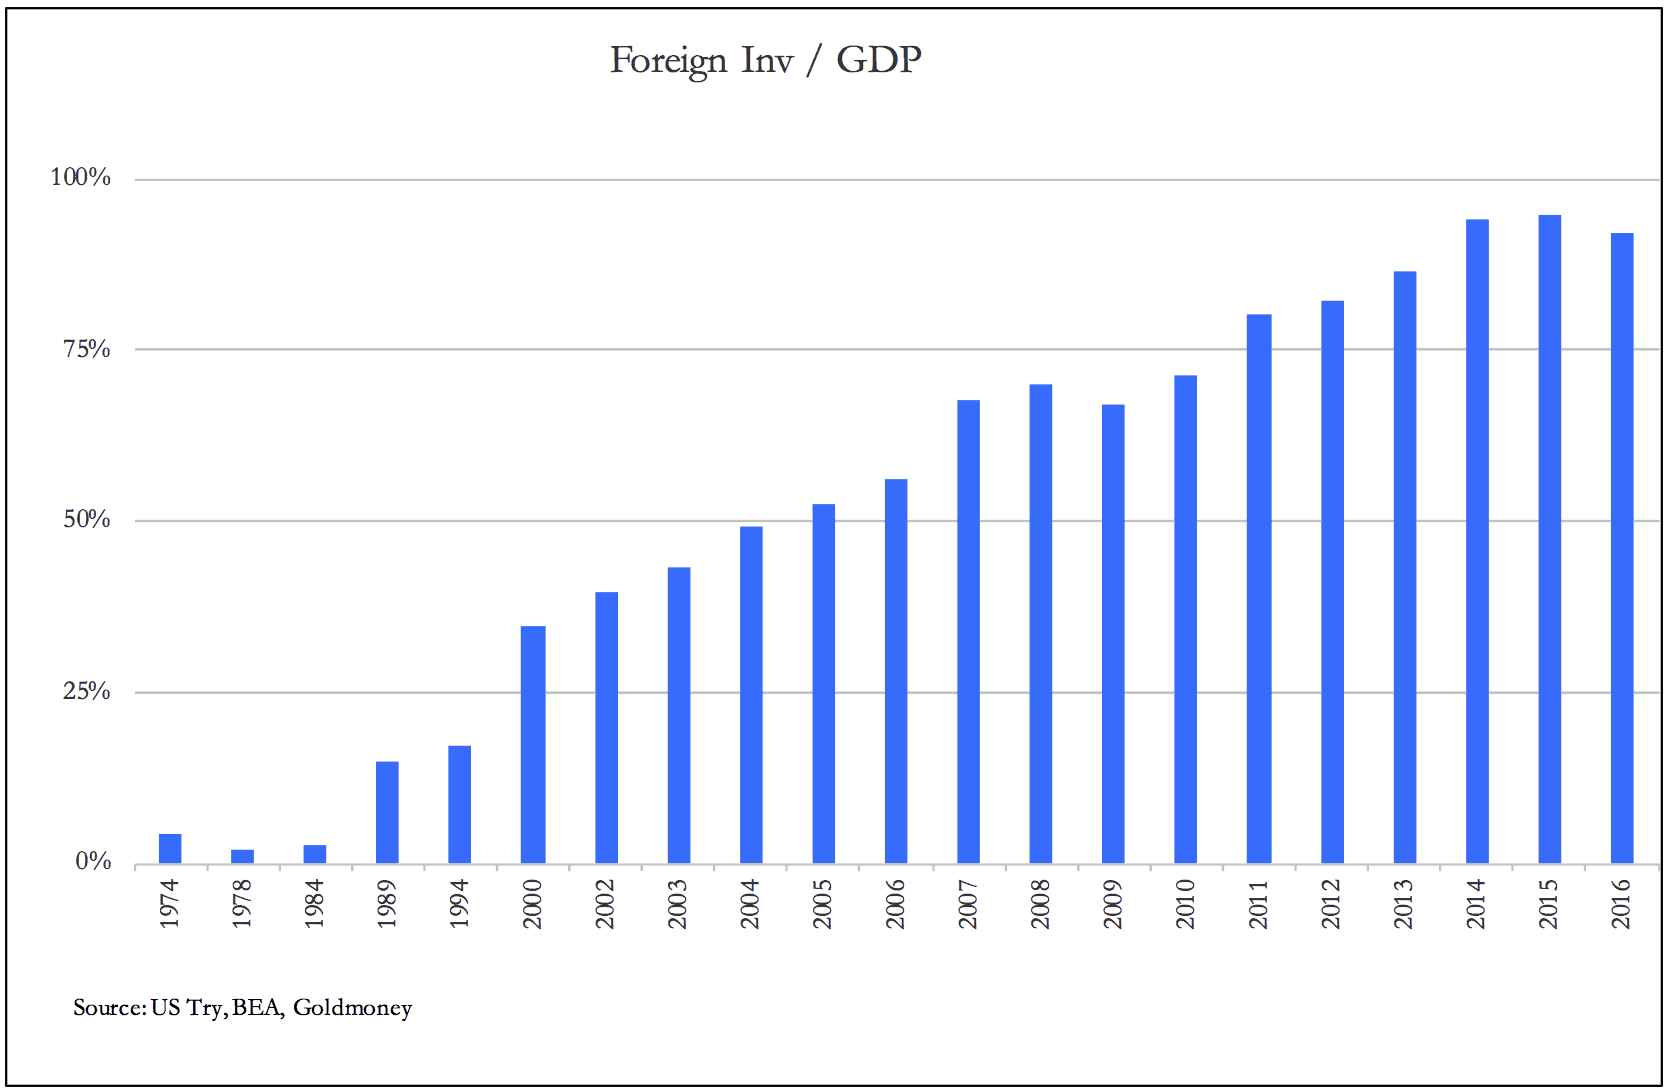 Foreign Investment / GDP Chart